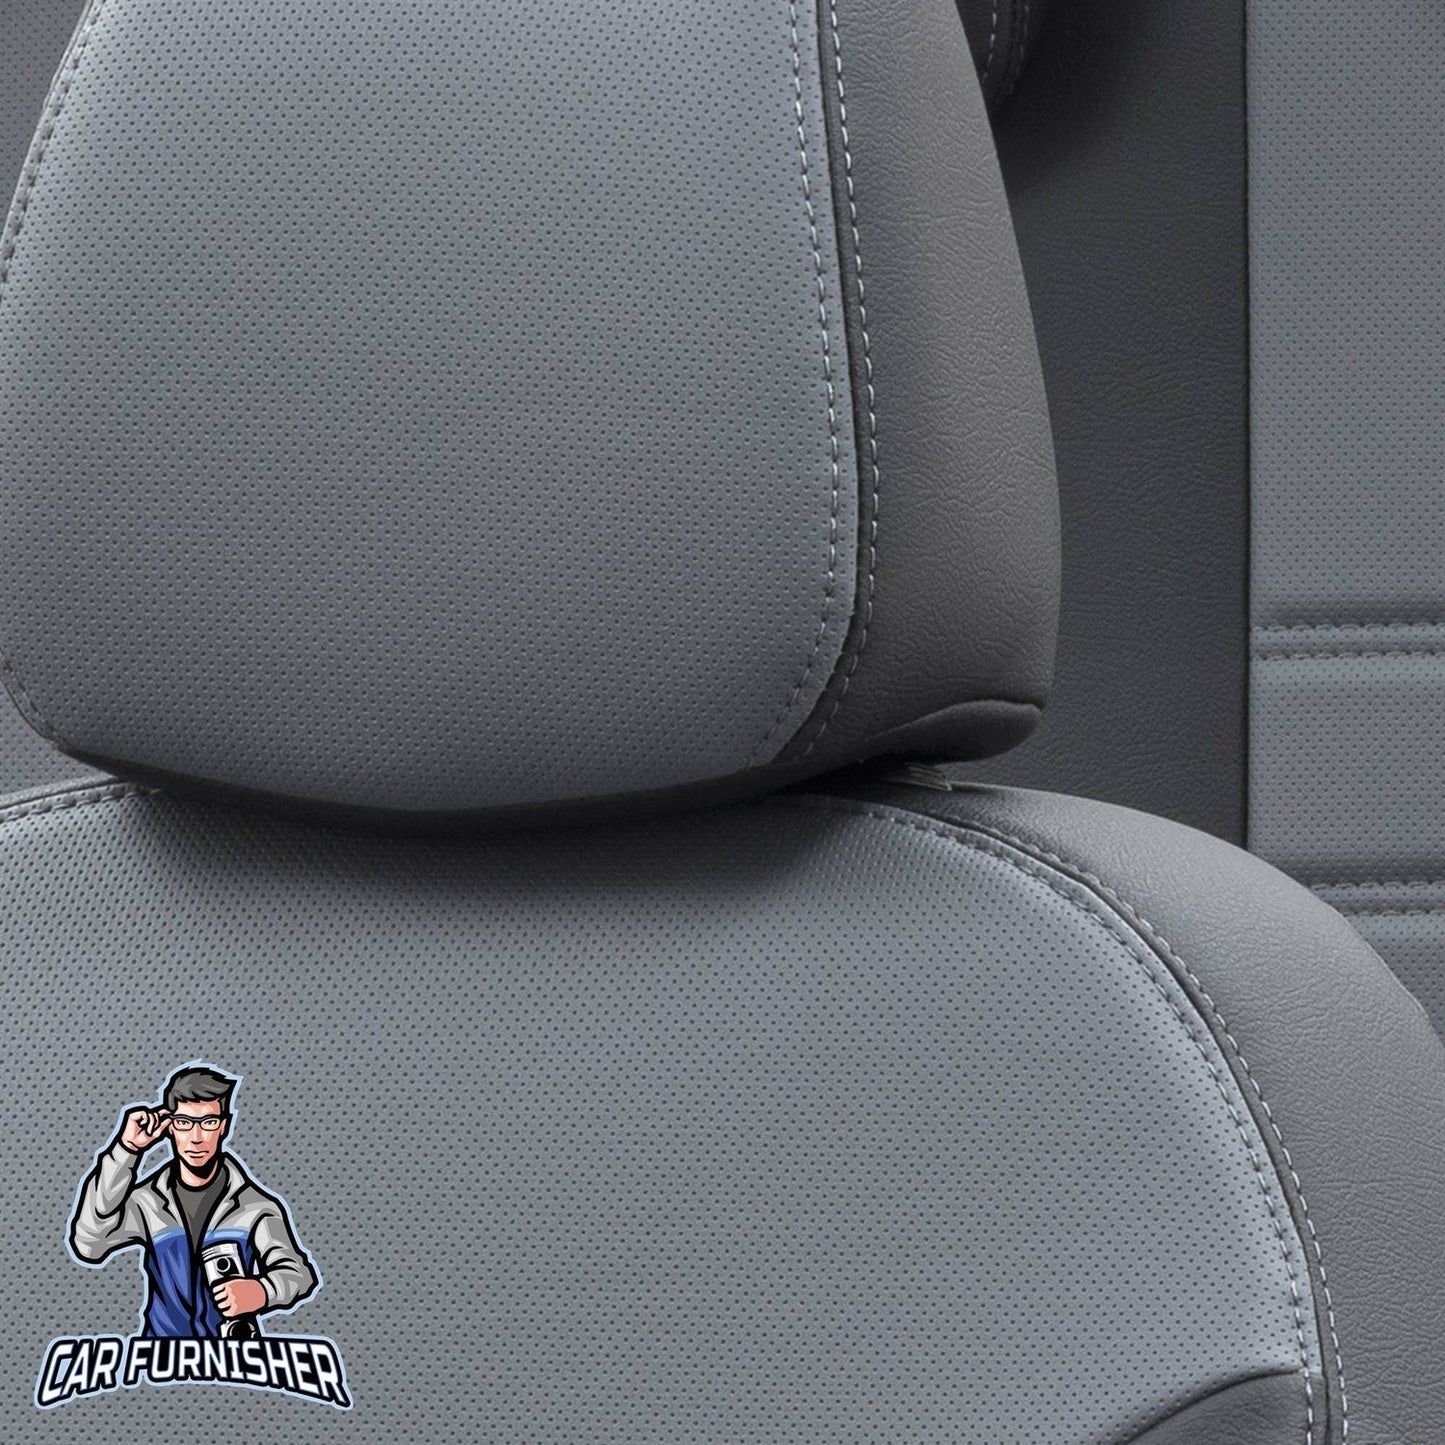 Volvo S90 Seat Cover Istanbul Leather Design Smoked Black Leather